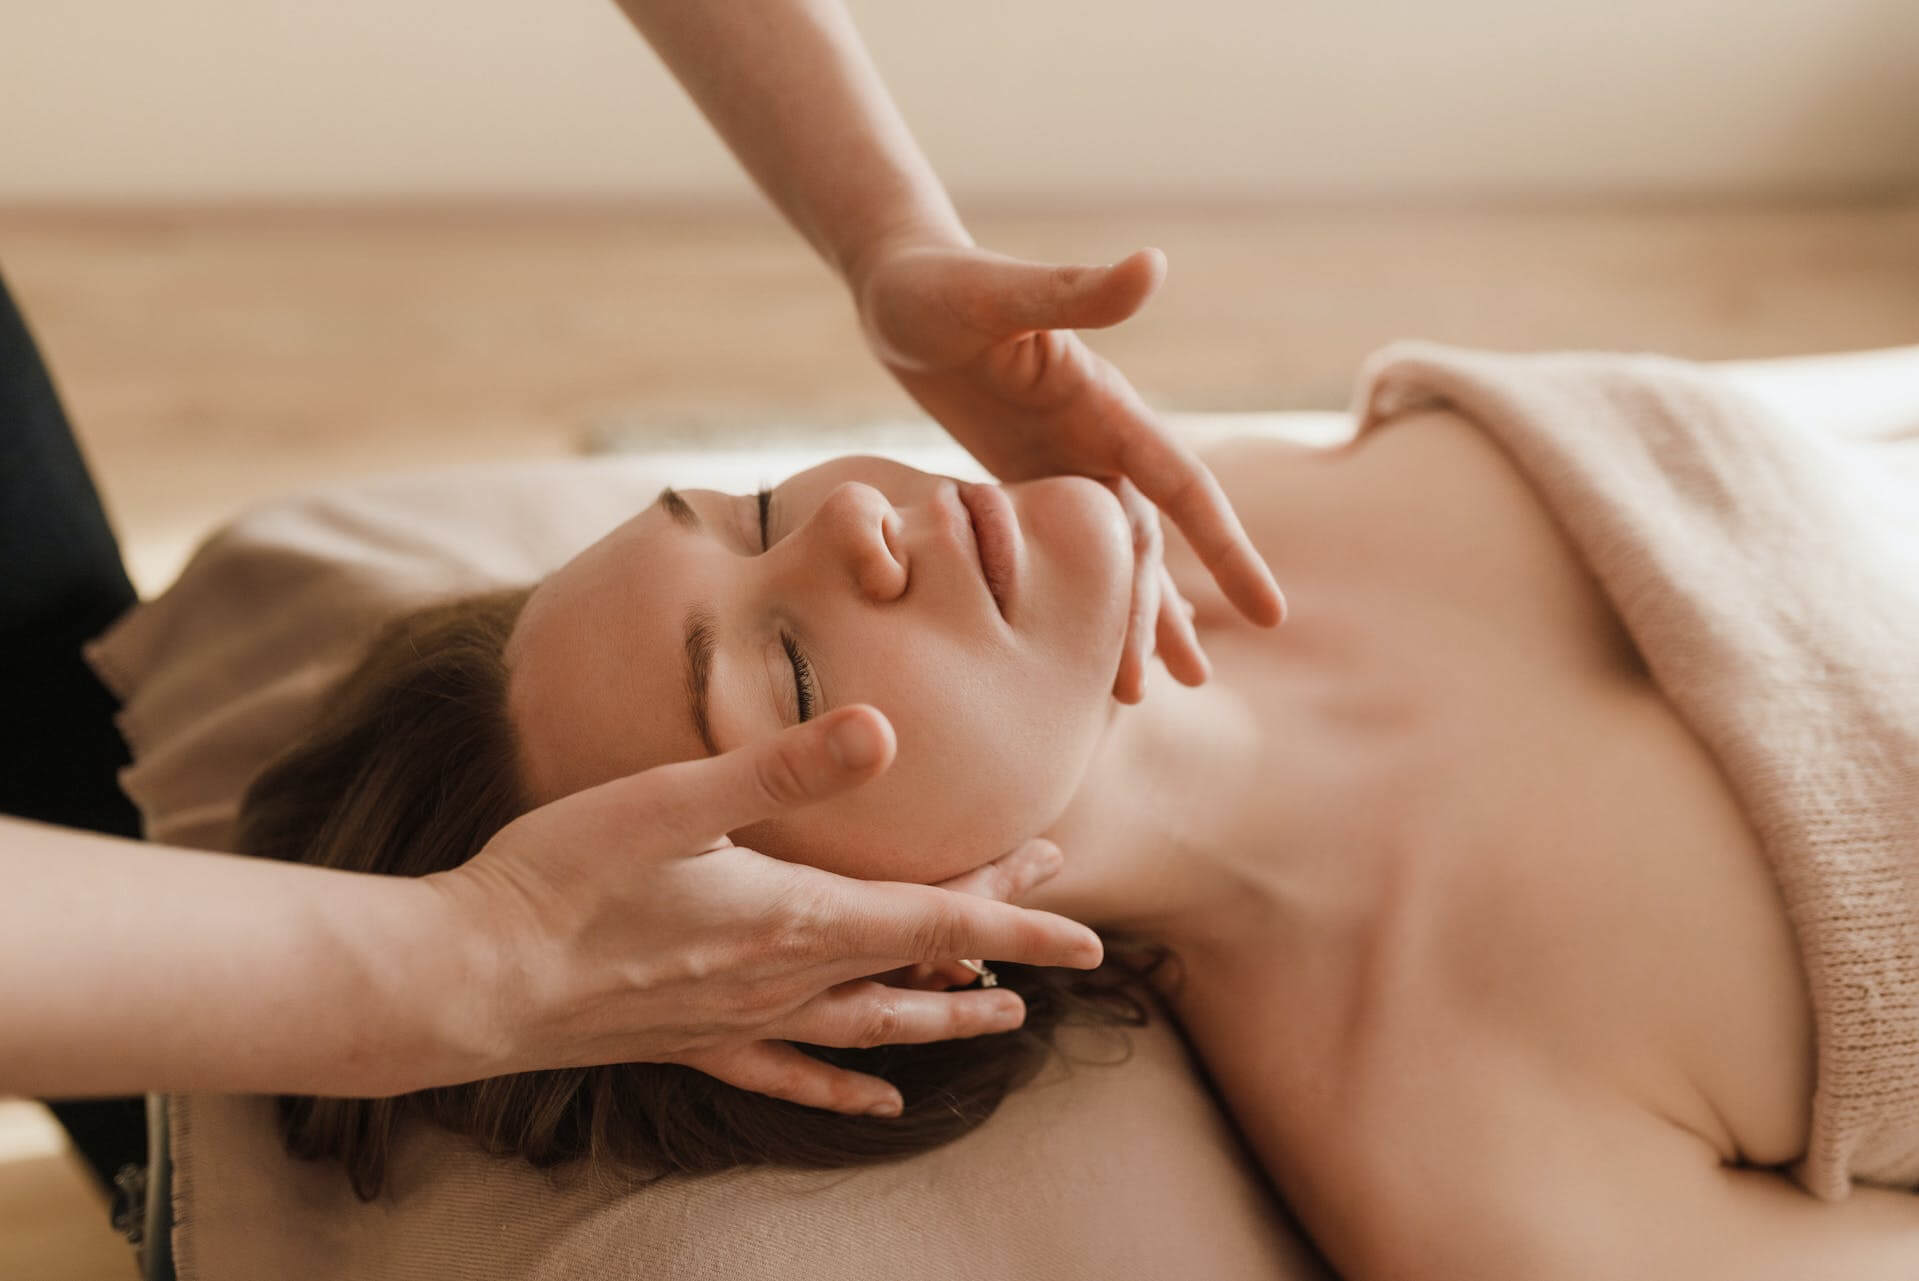 A woman getting a massage spa package.